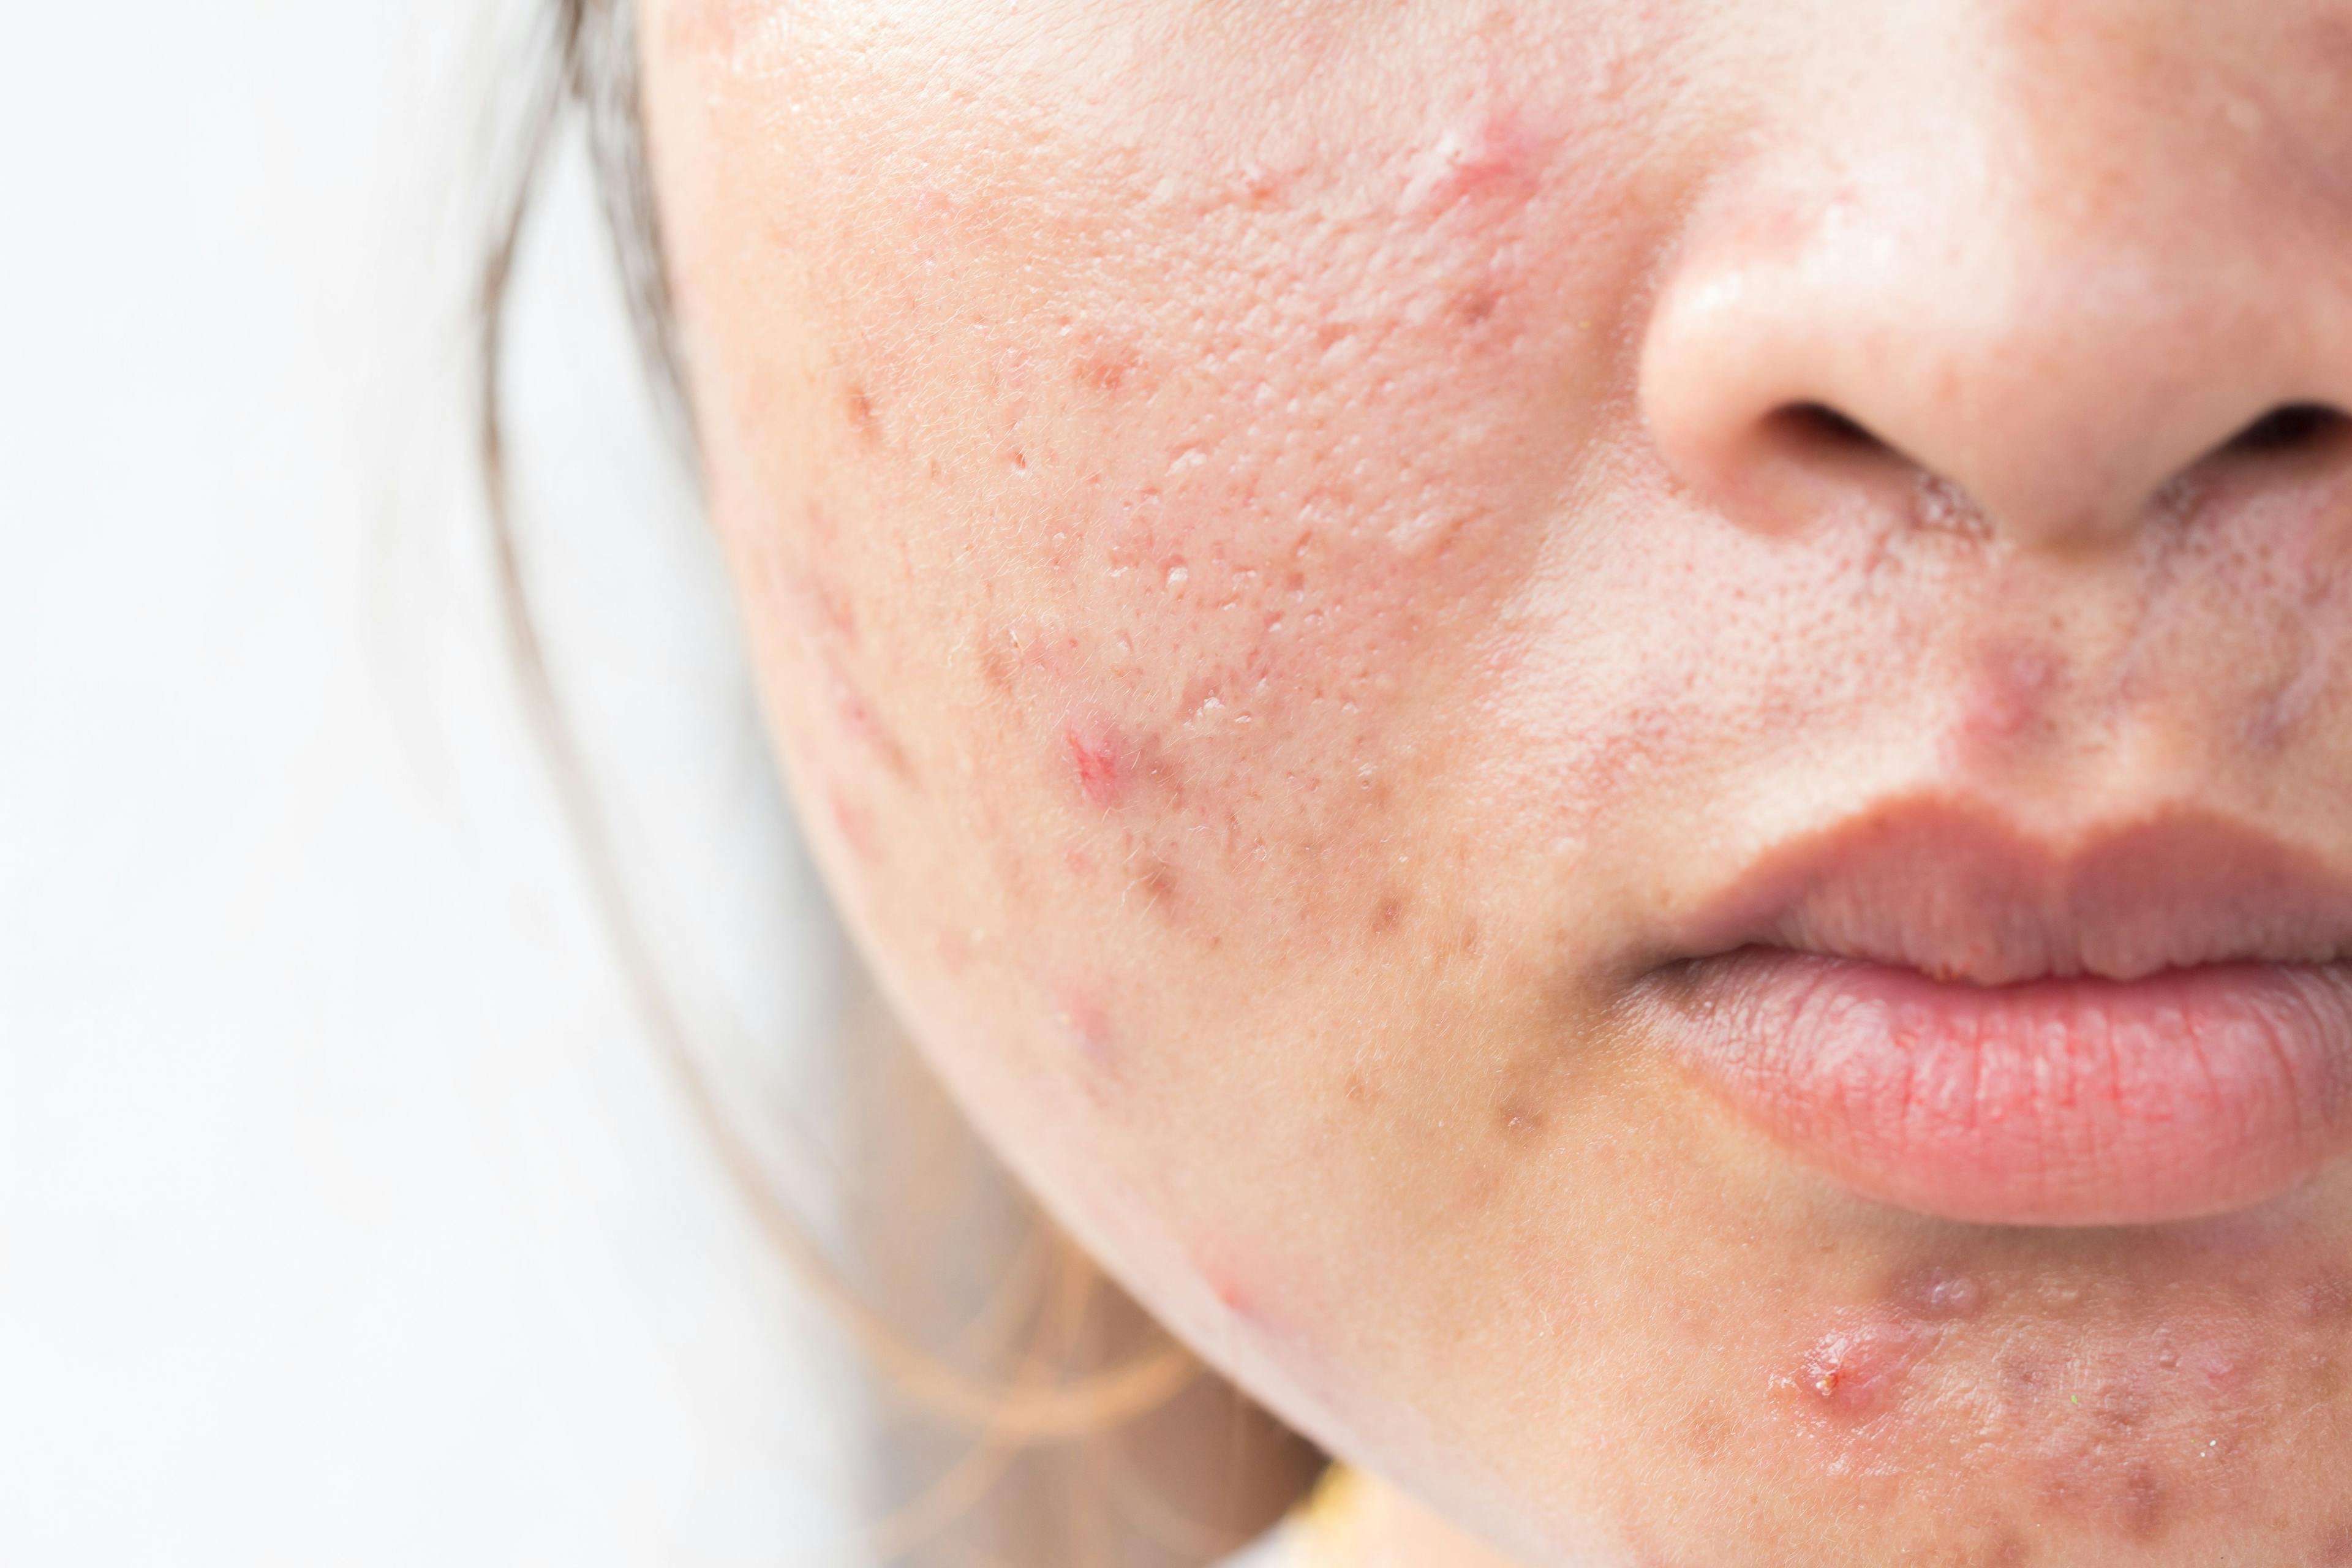 How Well Can AI Diagnose and Monitor Acne?